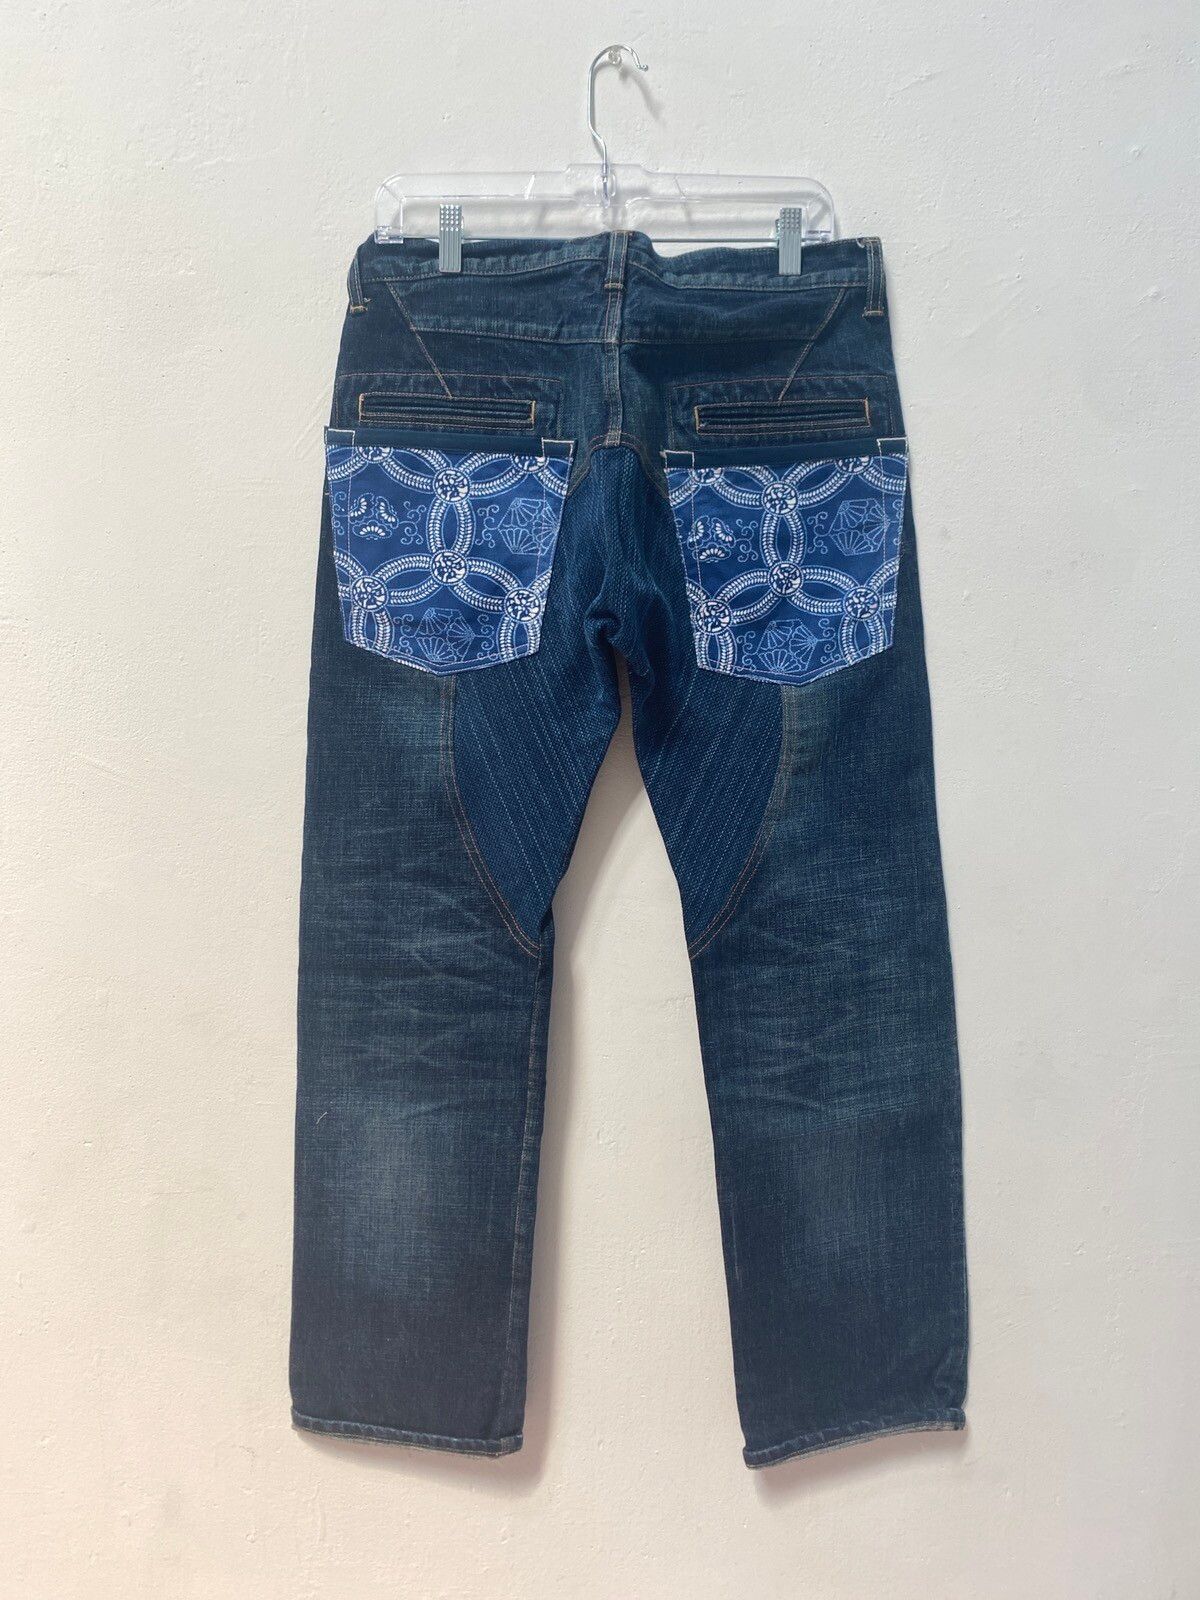 Junya Watanabe AW14 Boro Patterned Jeans Size US 32 / EU 48 - 1 Preview